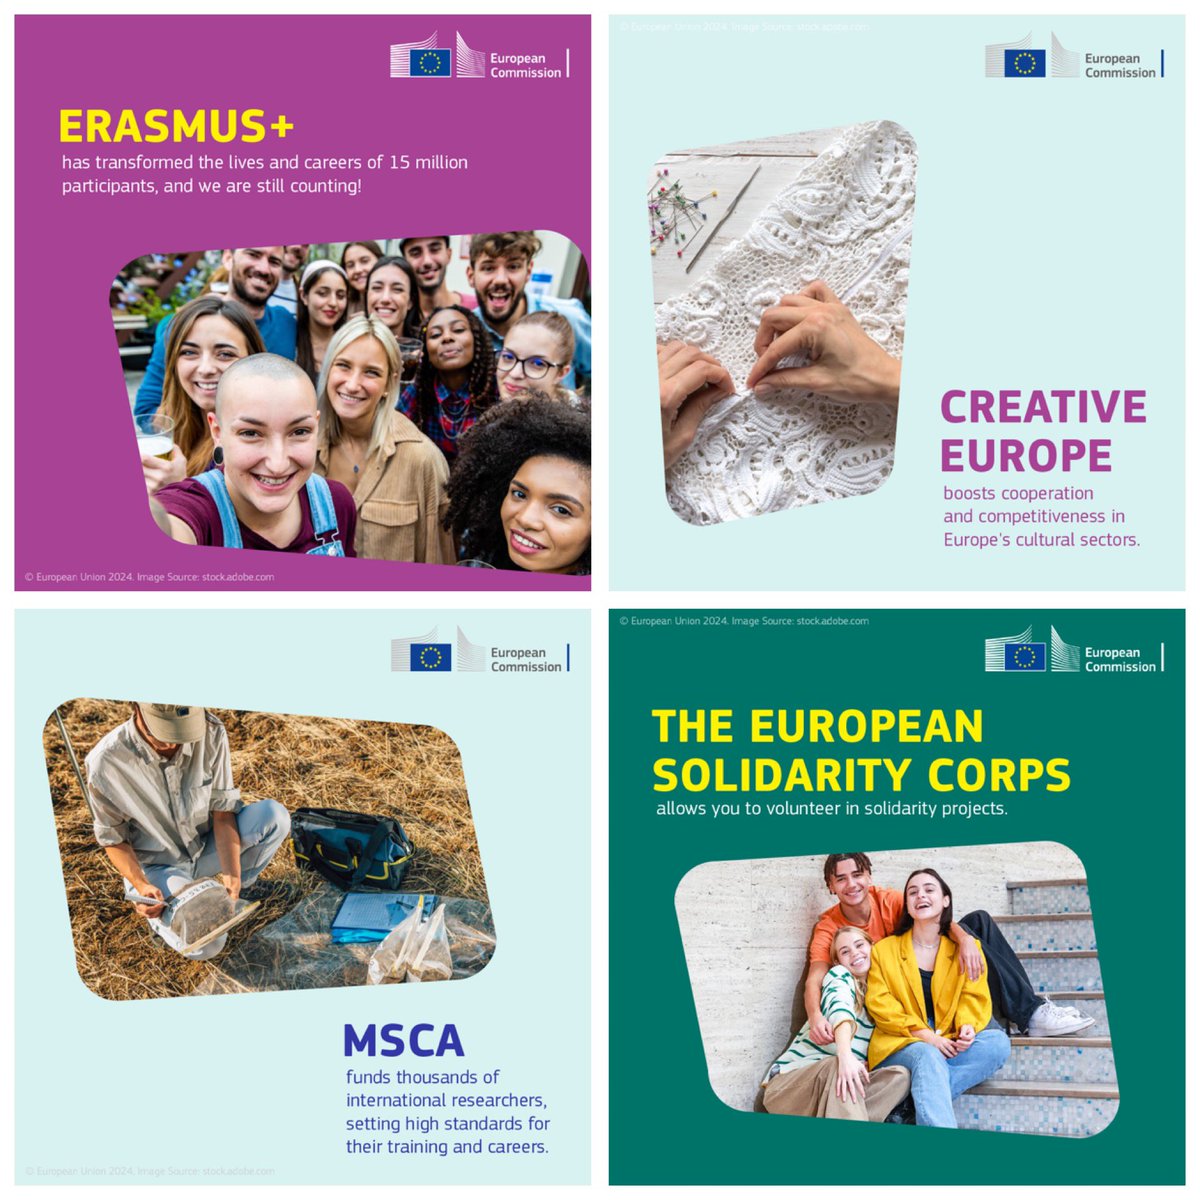 The EU’s founding fathers dared to dream of a peaceful & prosperous Europe. 🇪🇺@EUErasmusPlus exchanges 🇪🇺@europe_creative culture support 🇪🇺@MSCActions 🇪🇺#EuropeanSolidarityCorps projects keep helping make their dreams come true. Dare to dream. Happy #EuropeDay!